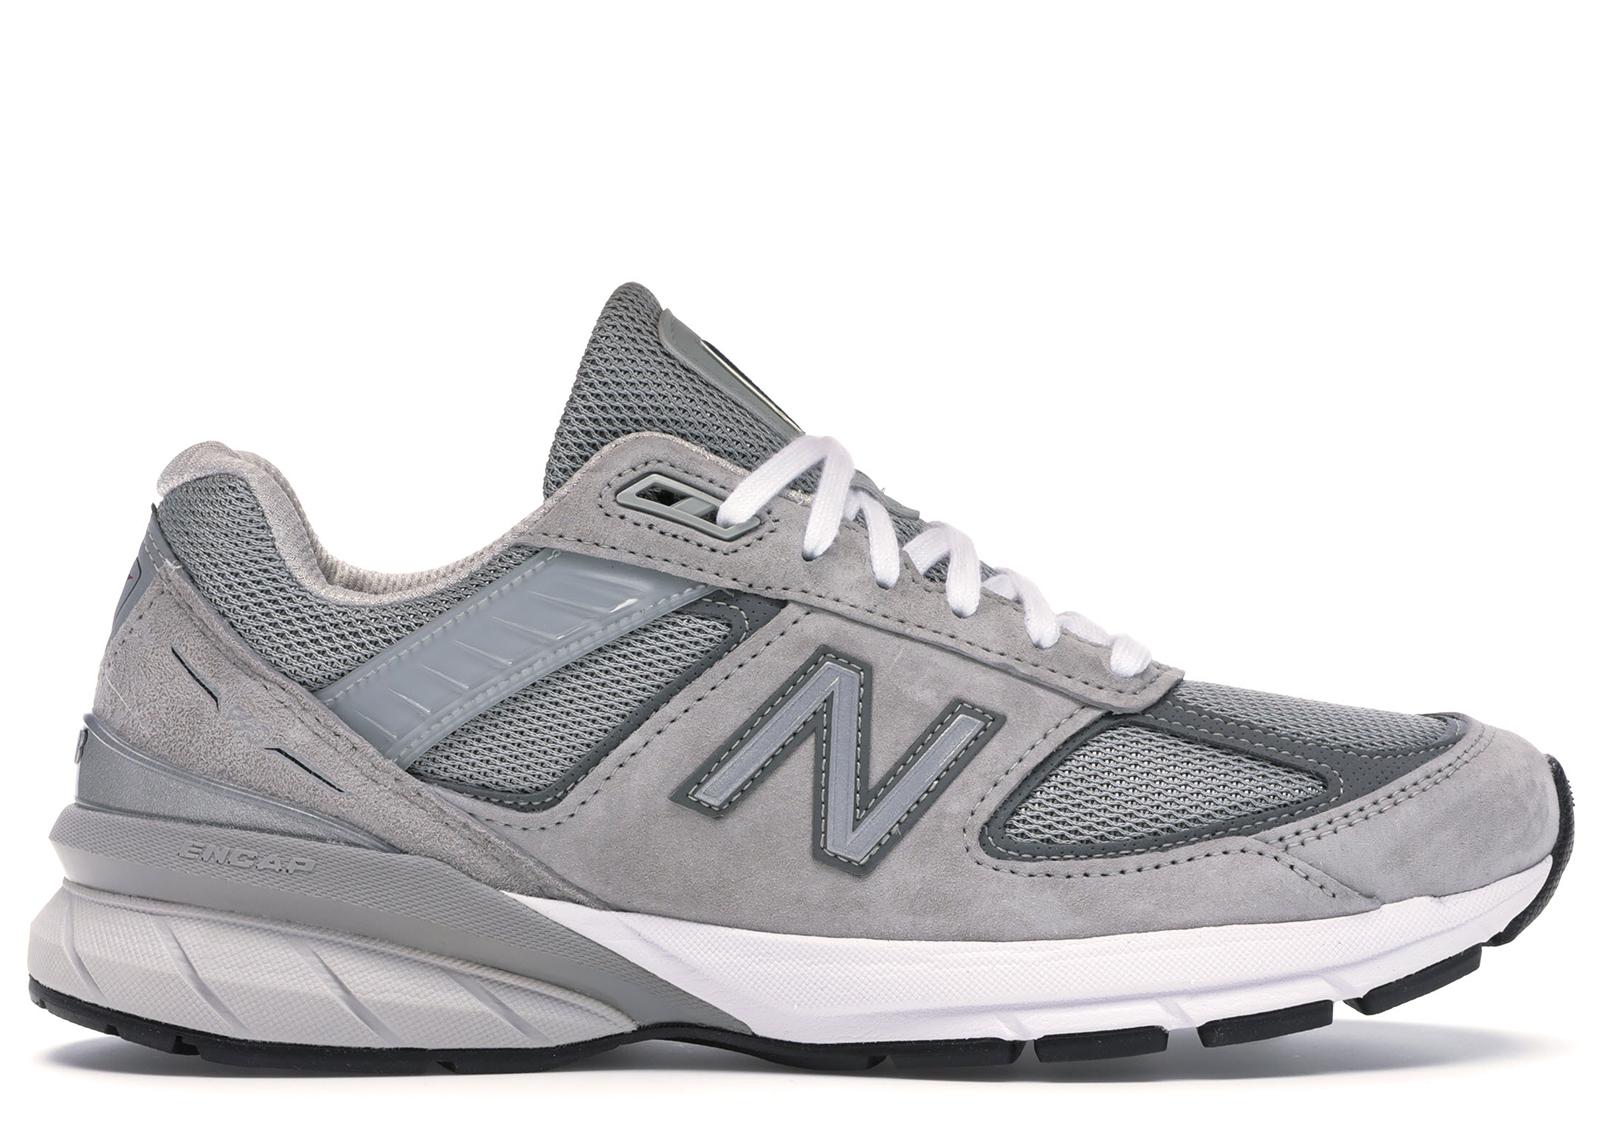 New Balance Leather S M990 990v4 Grey Size: 11 Xw Us in Gray for Men - Lyst